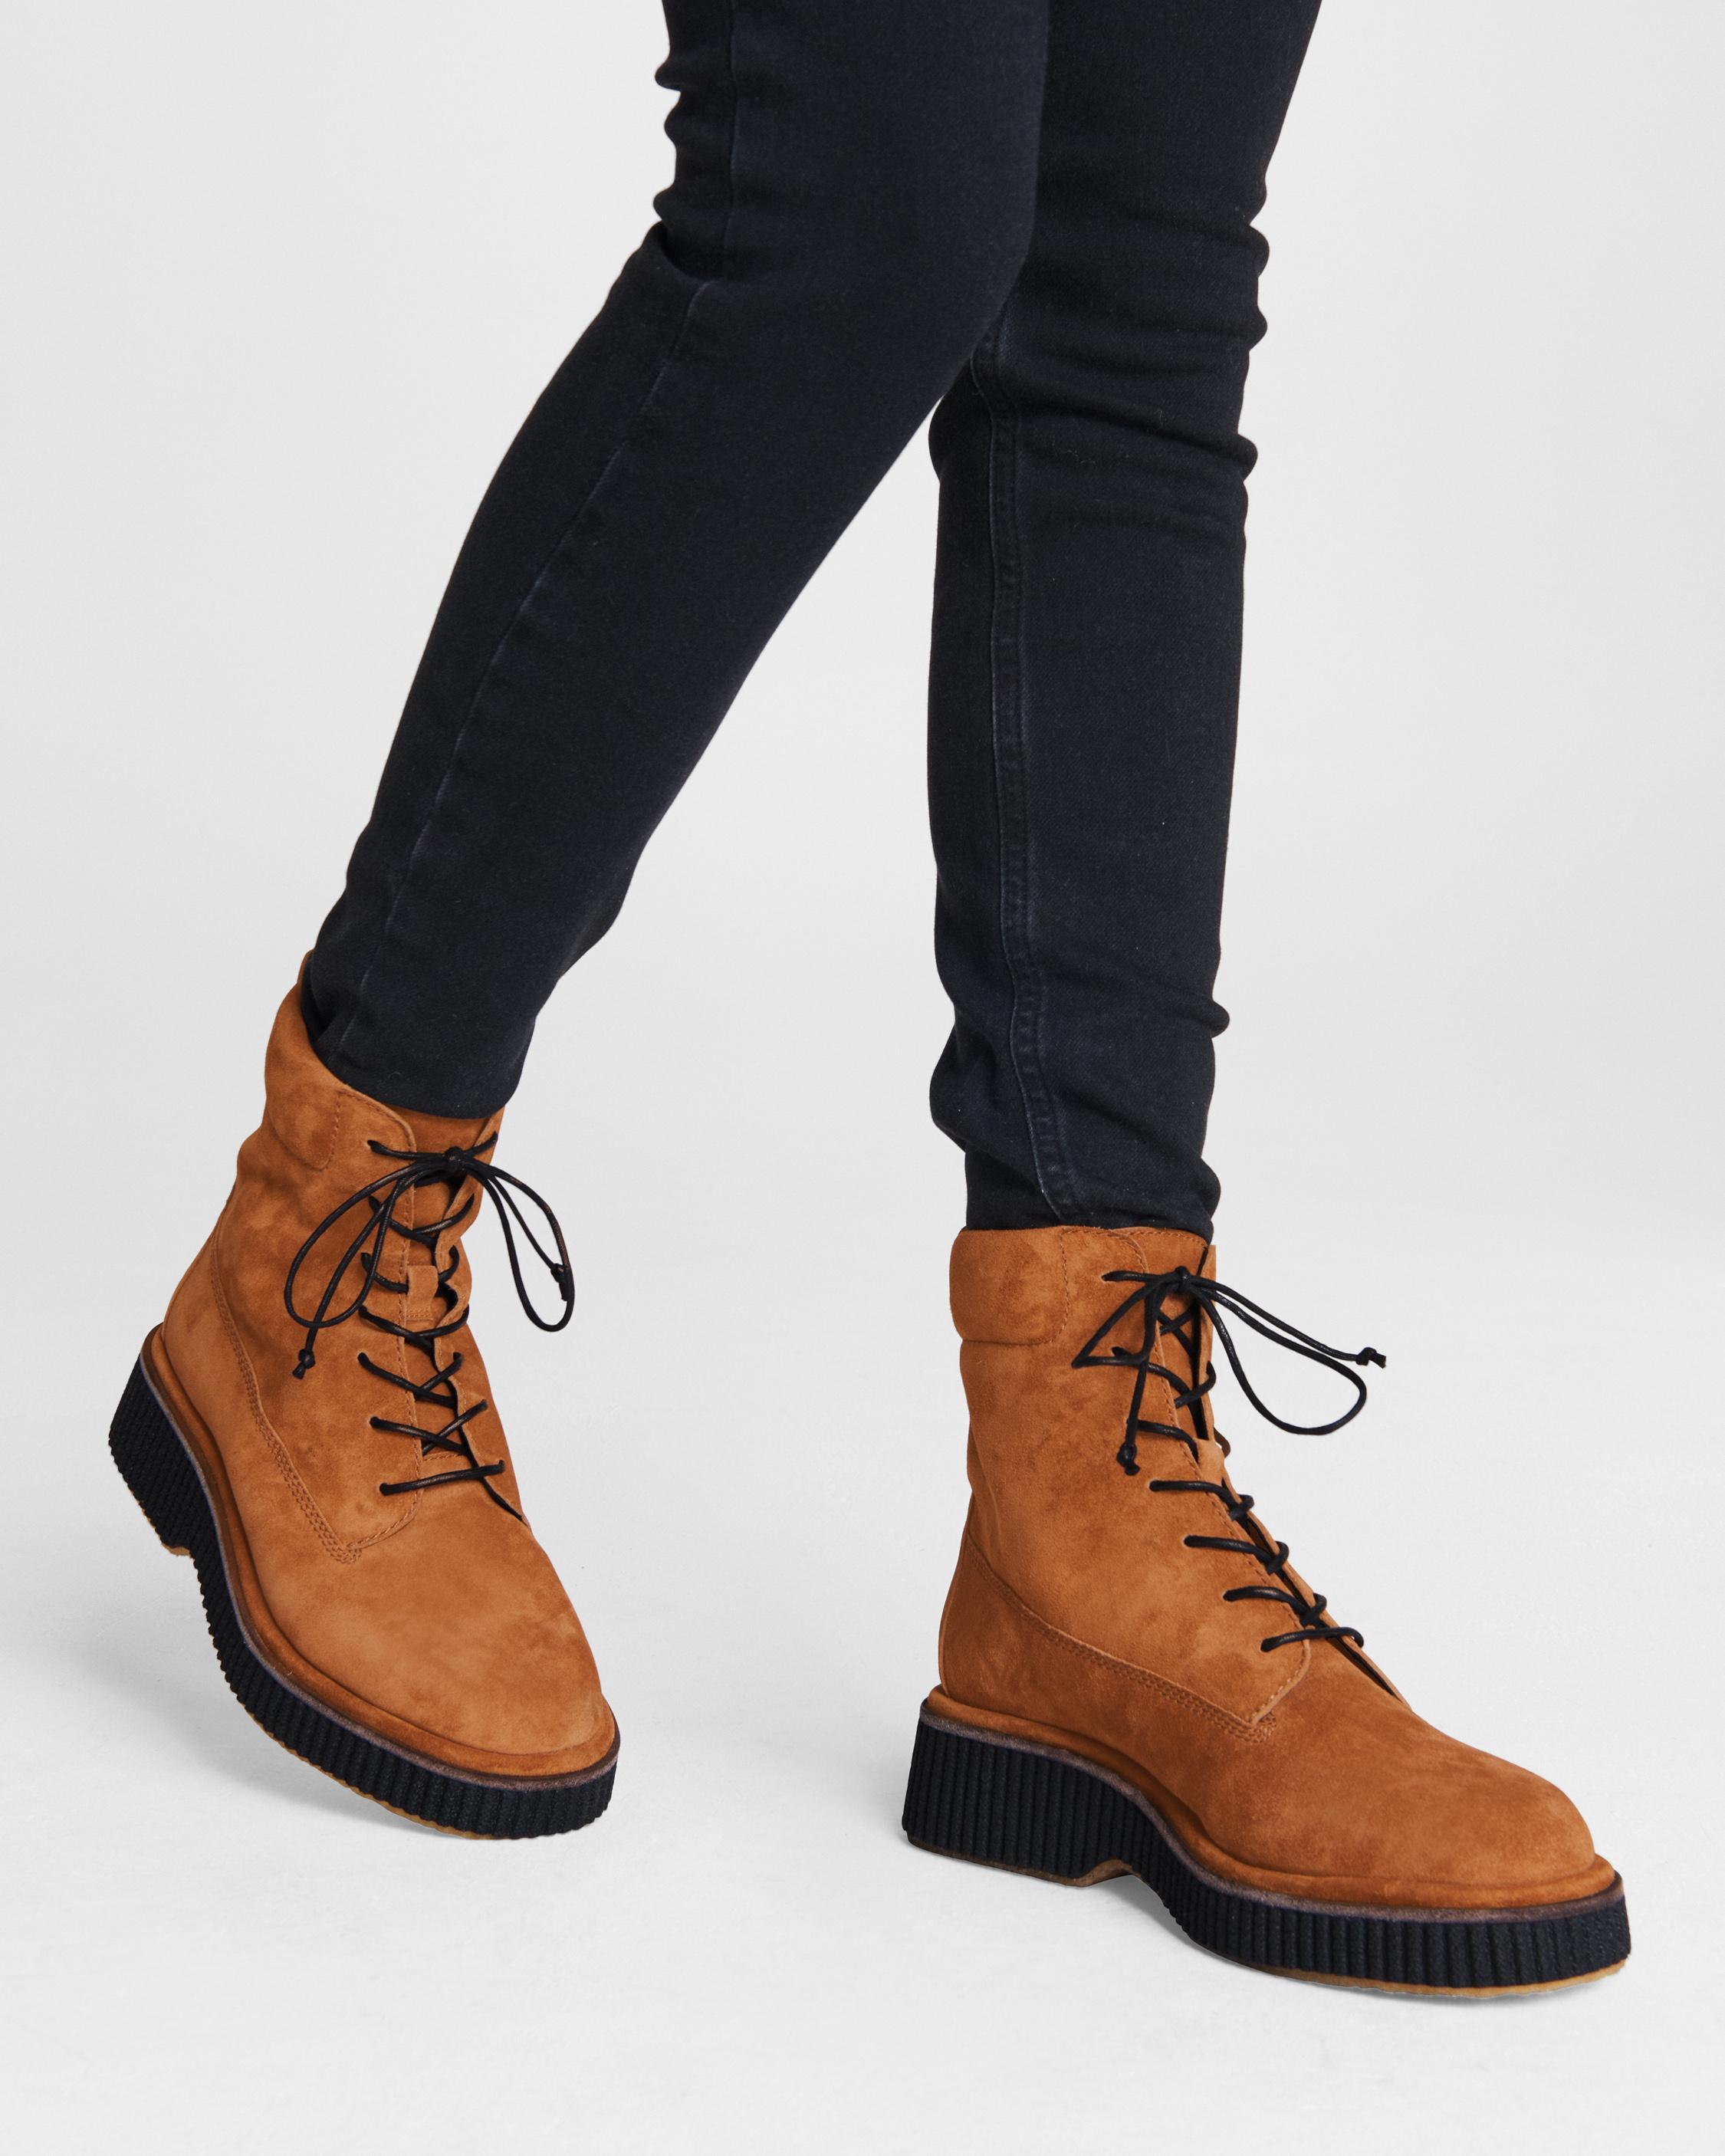 Rag & Bone Sloane Boot - Suede Lace Up Ankle Boot in Cinnamon Suede (Brown)  - Save 43% - Lyst